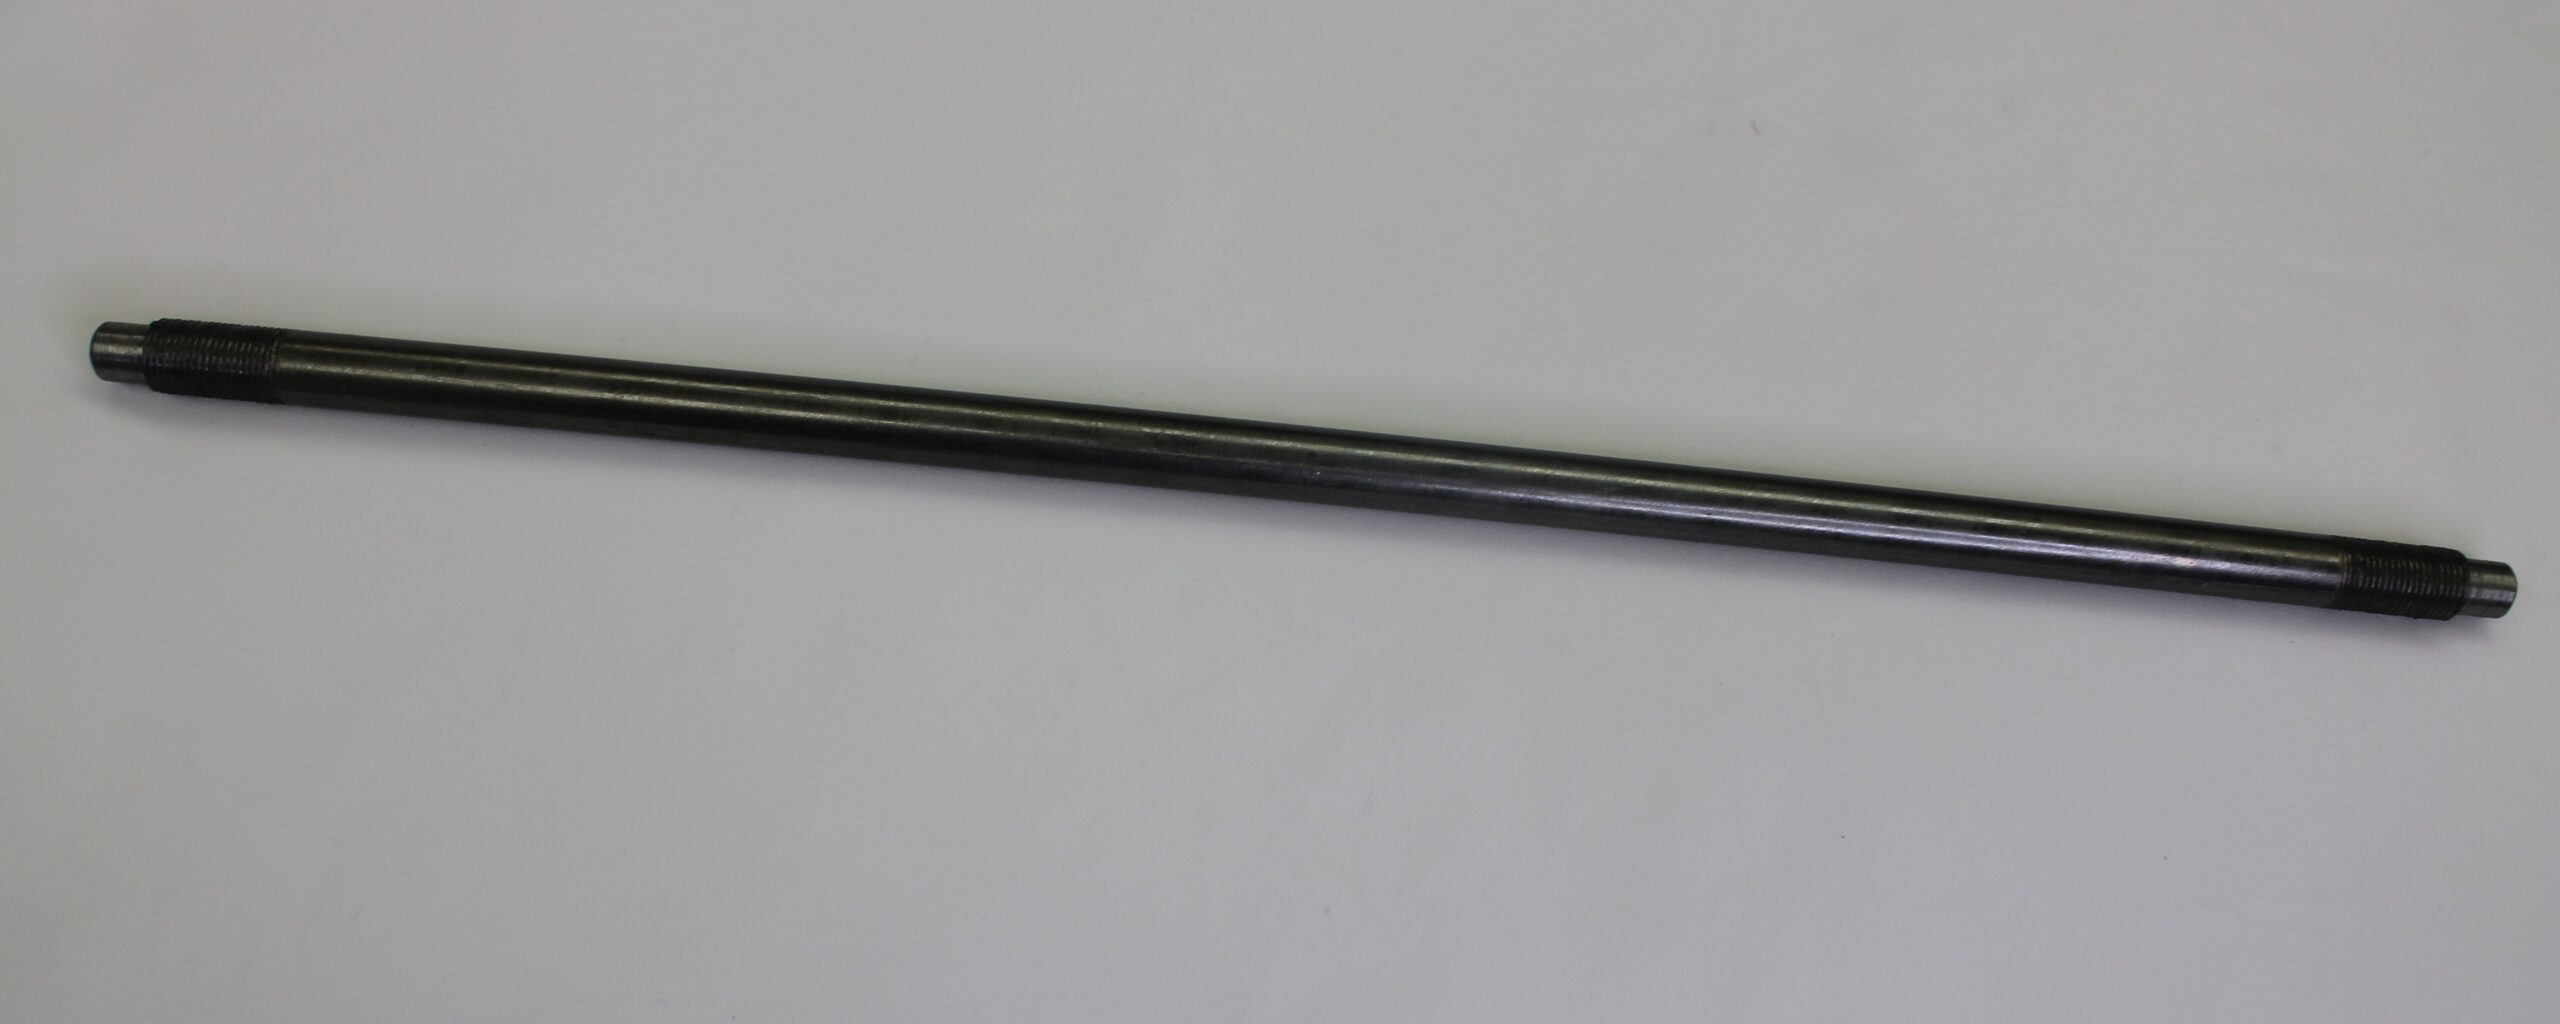 FRONT ROLLER SHAFT – McLane made in USA since 1946